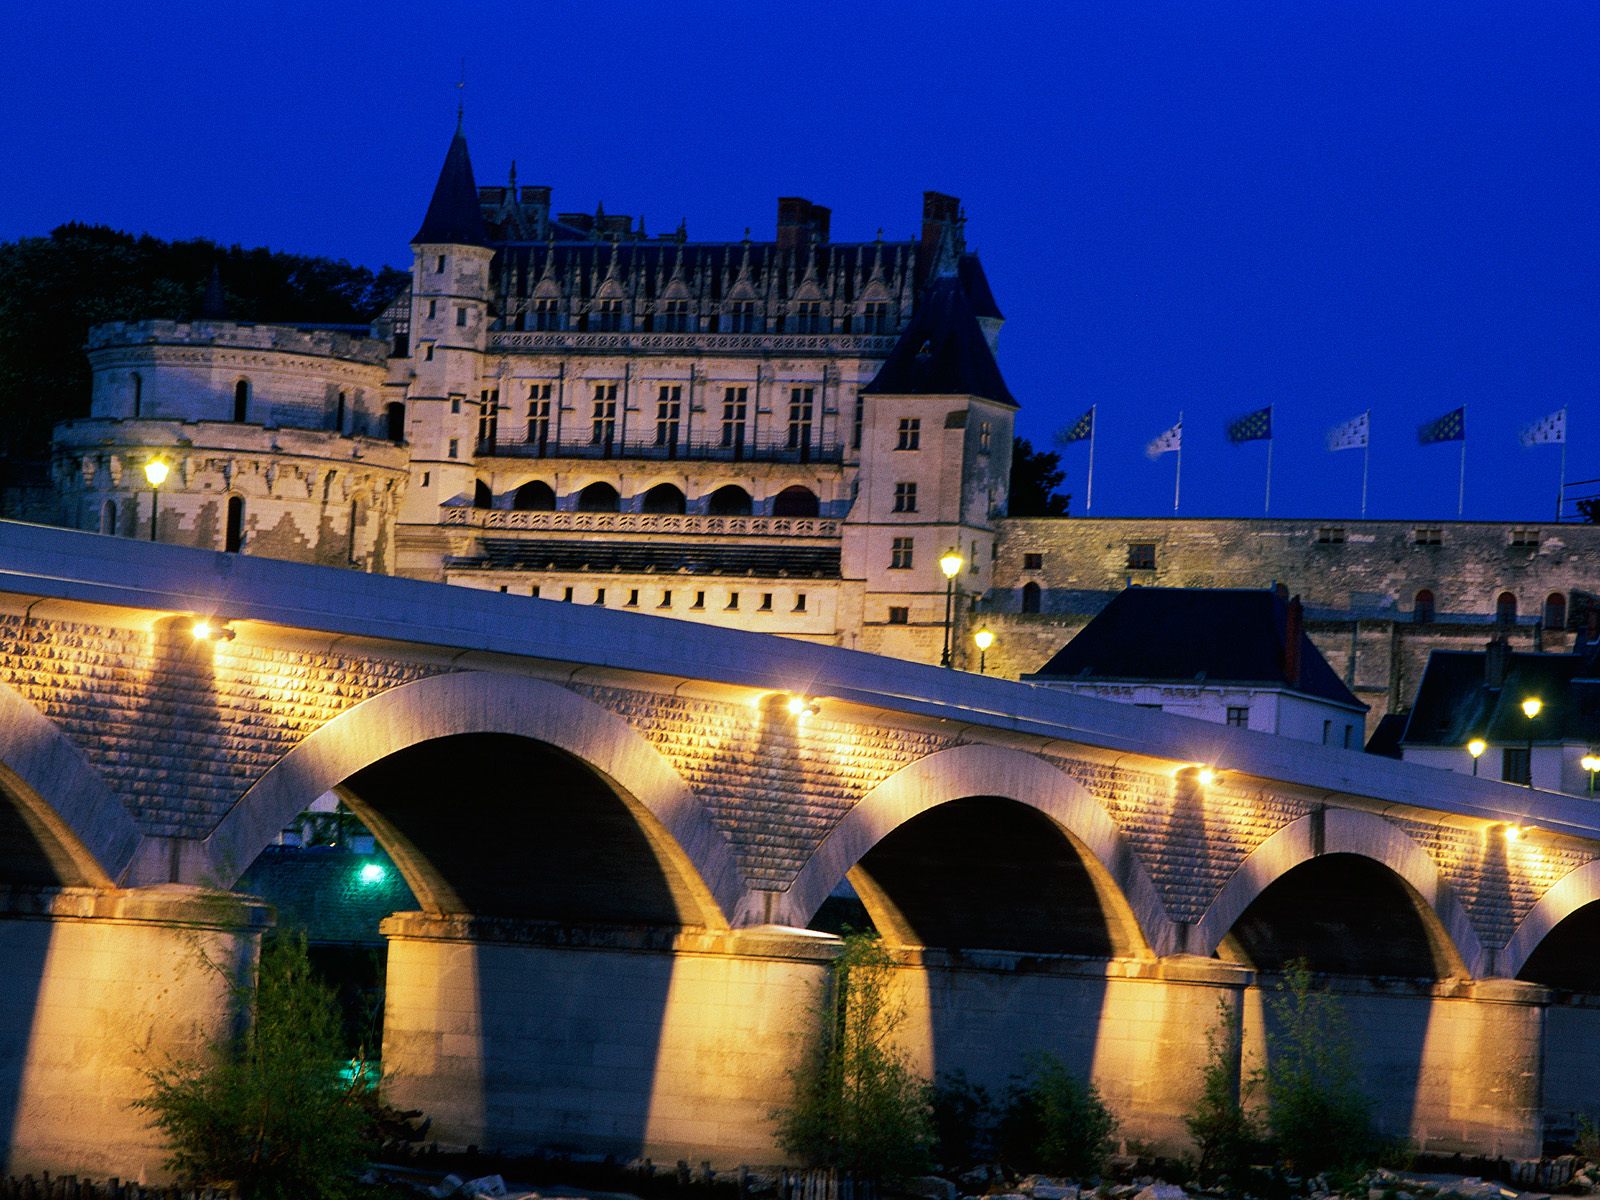 http://www.citypictures.org/data/media/218/Chateau_d%27_Amboise_France.jpg